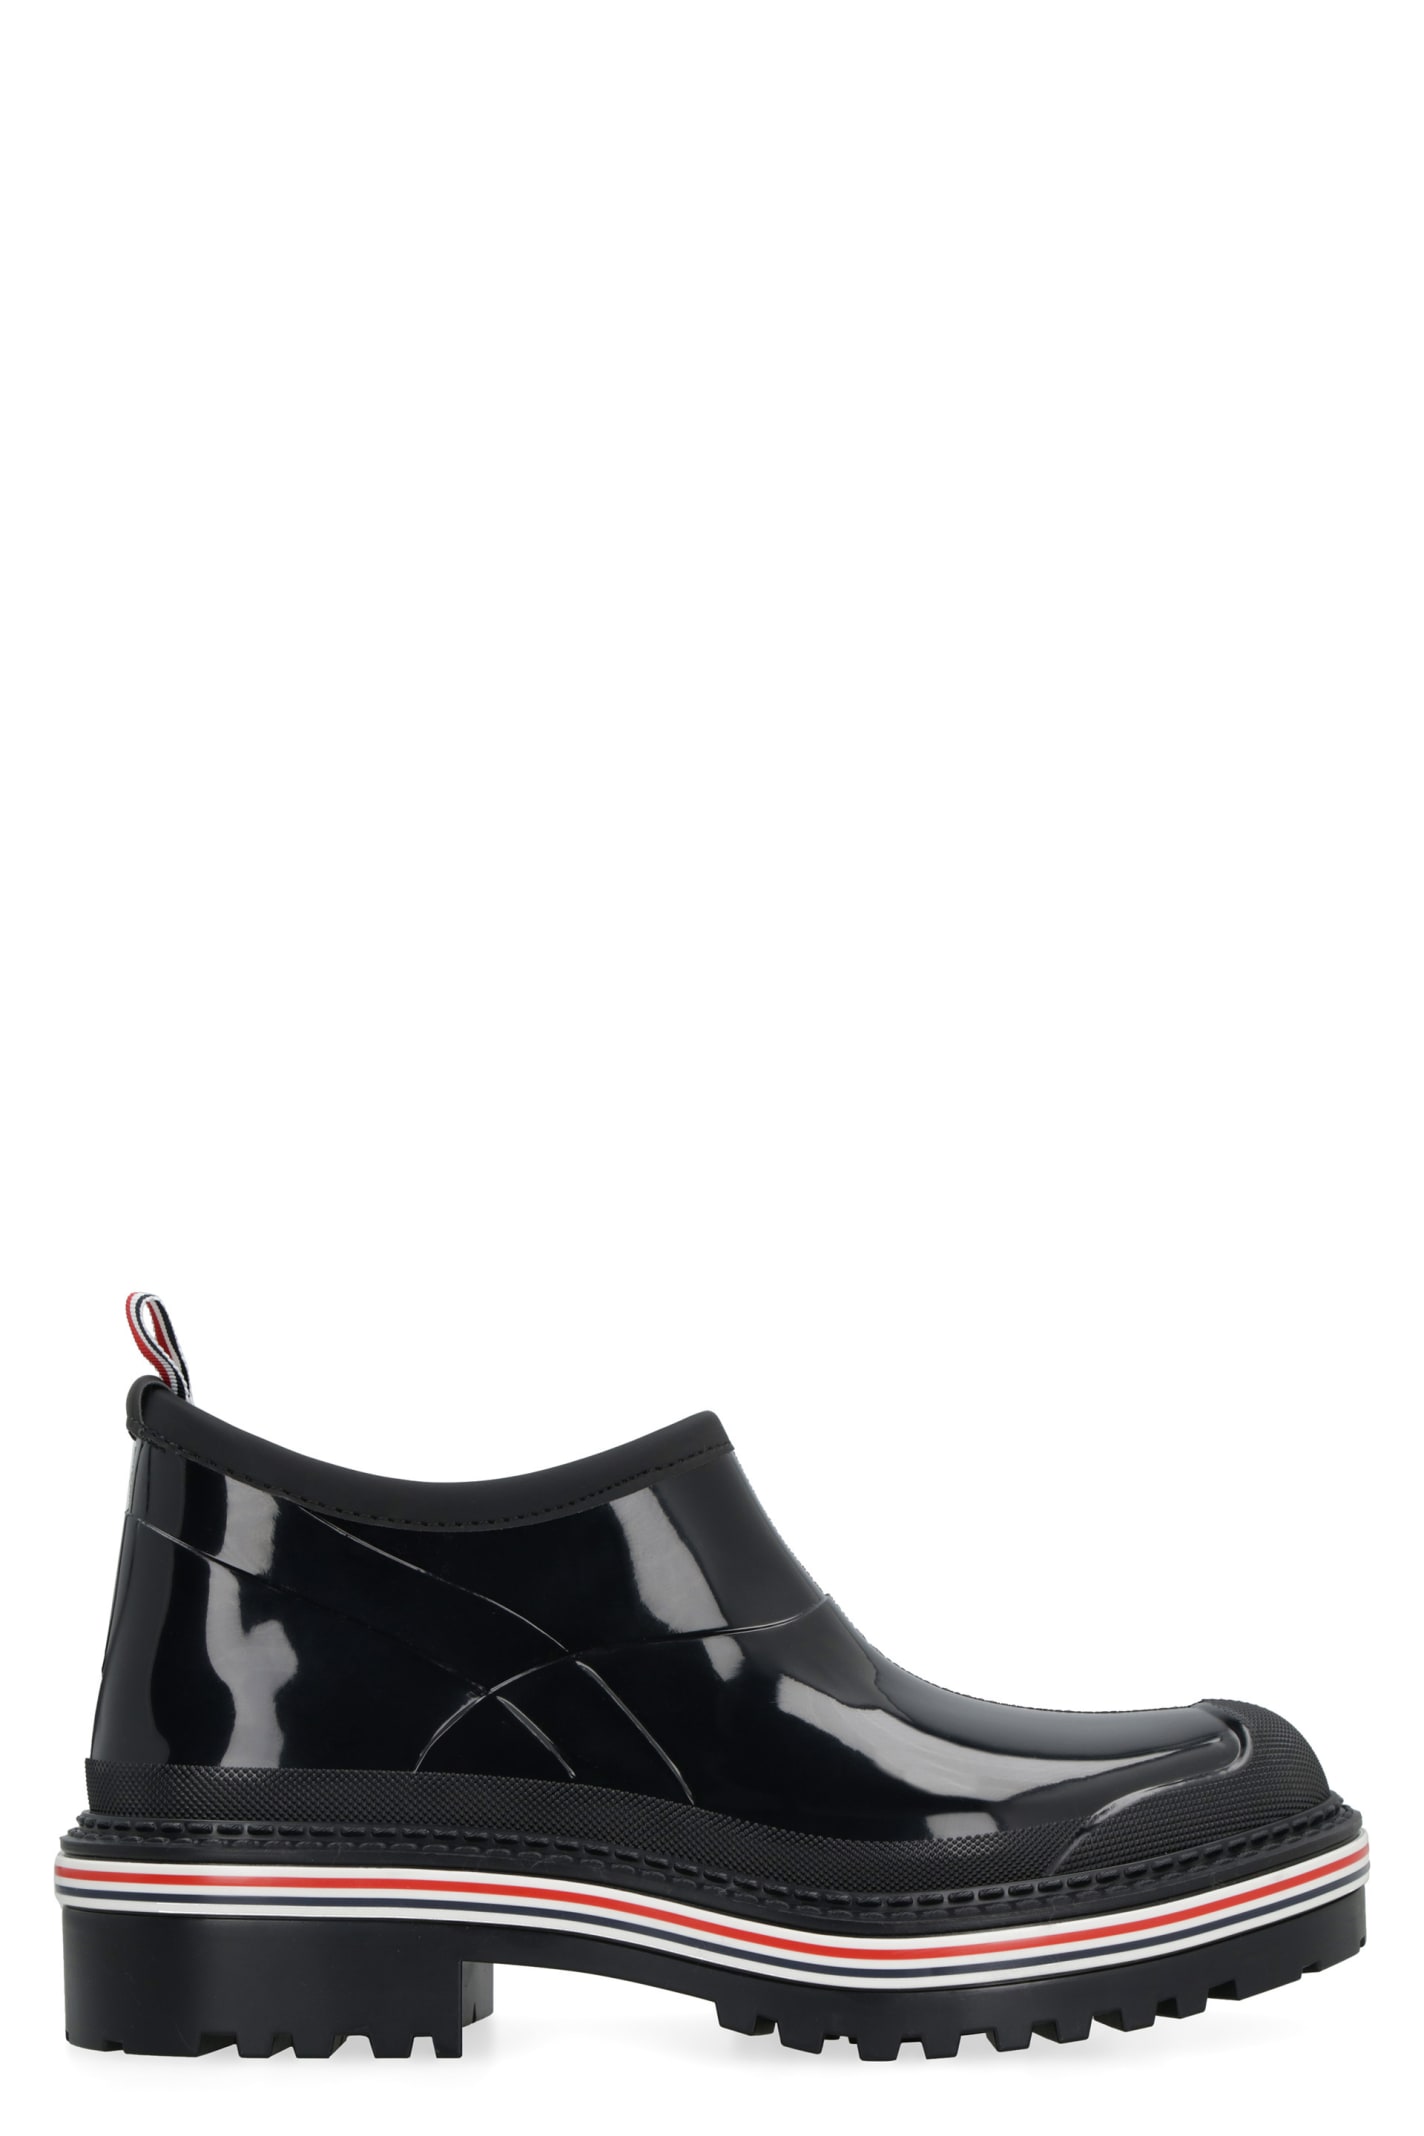 THOM BROWNE RUBBER ANKLE BOOTS